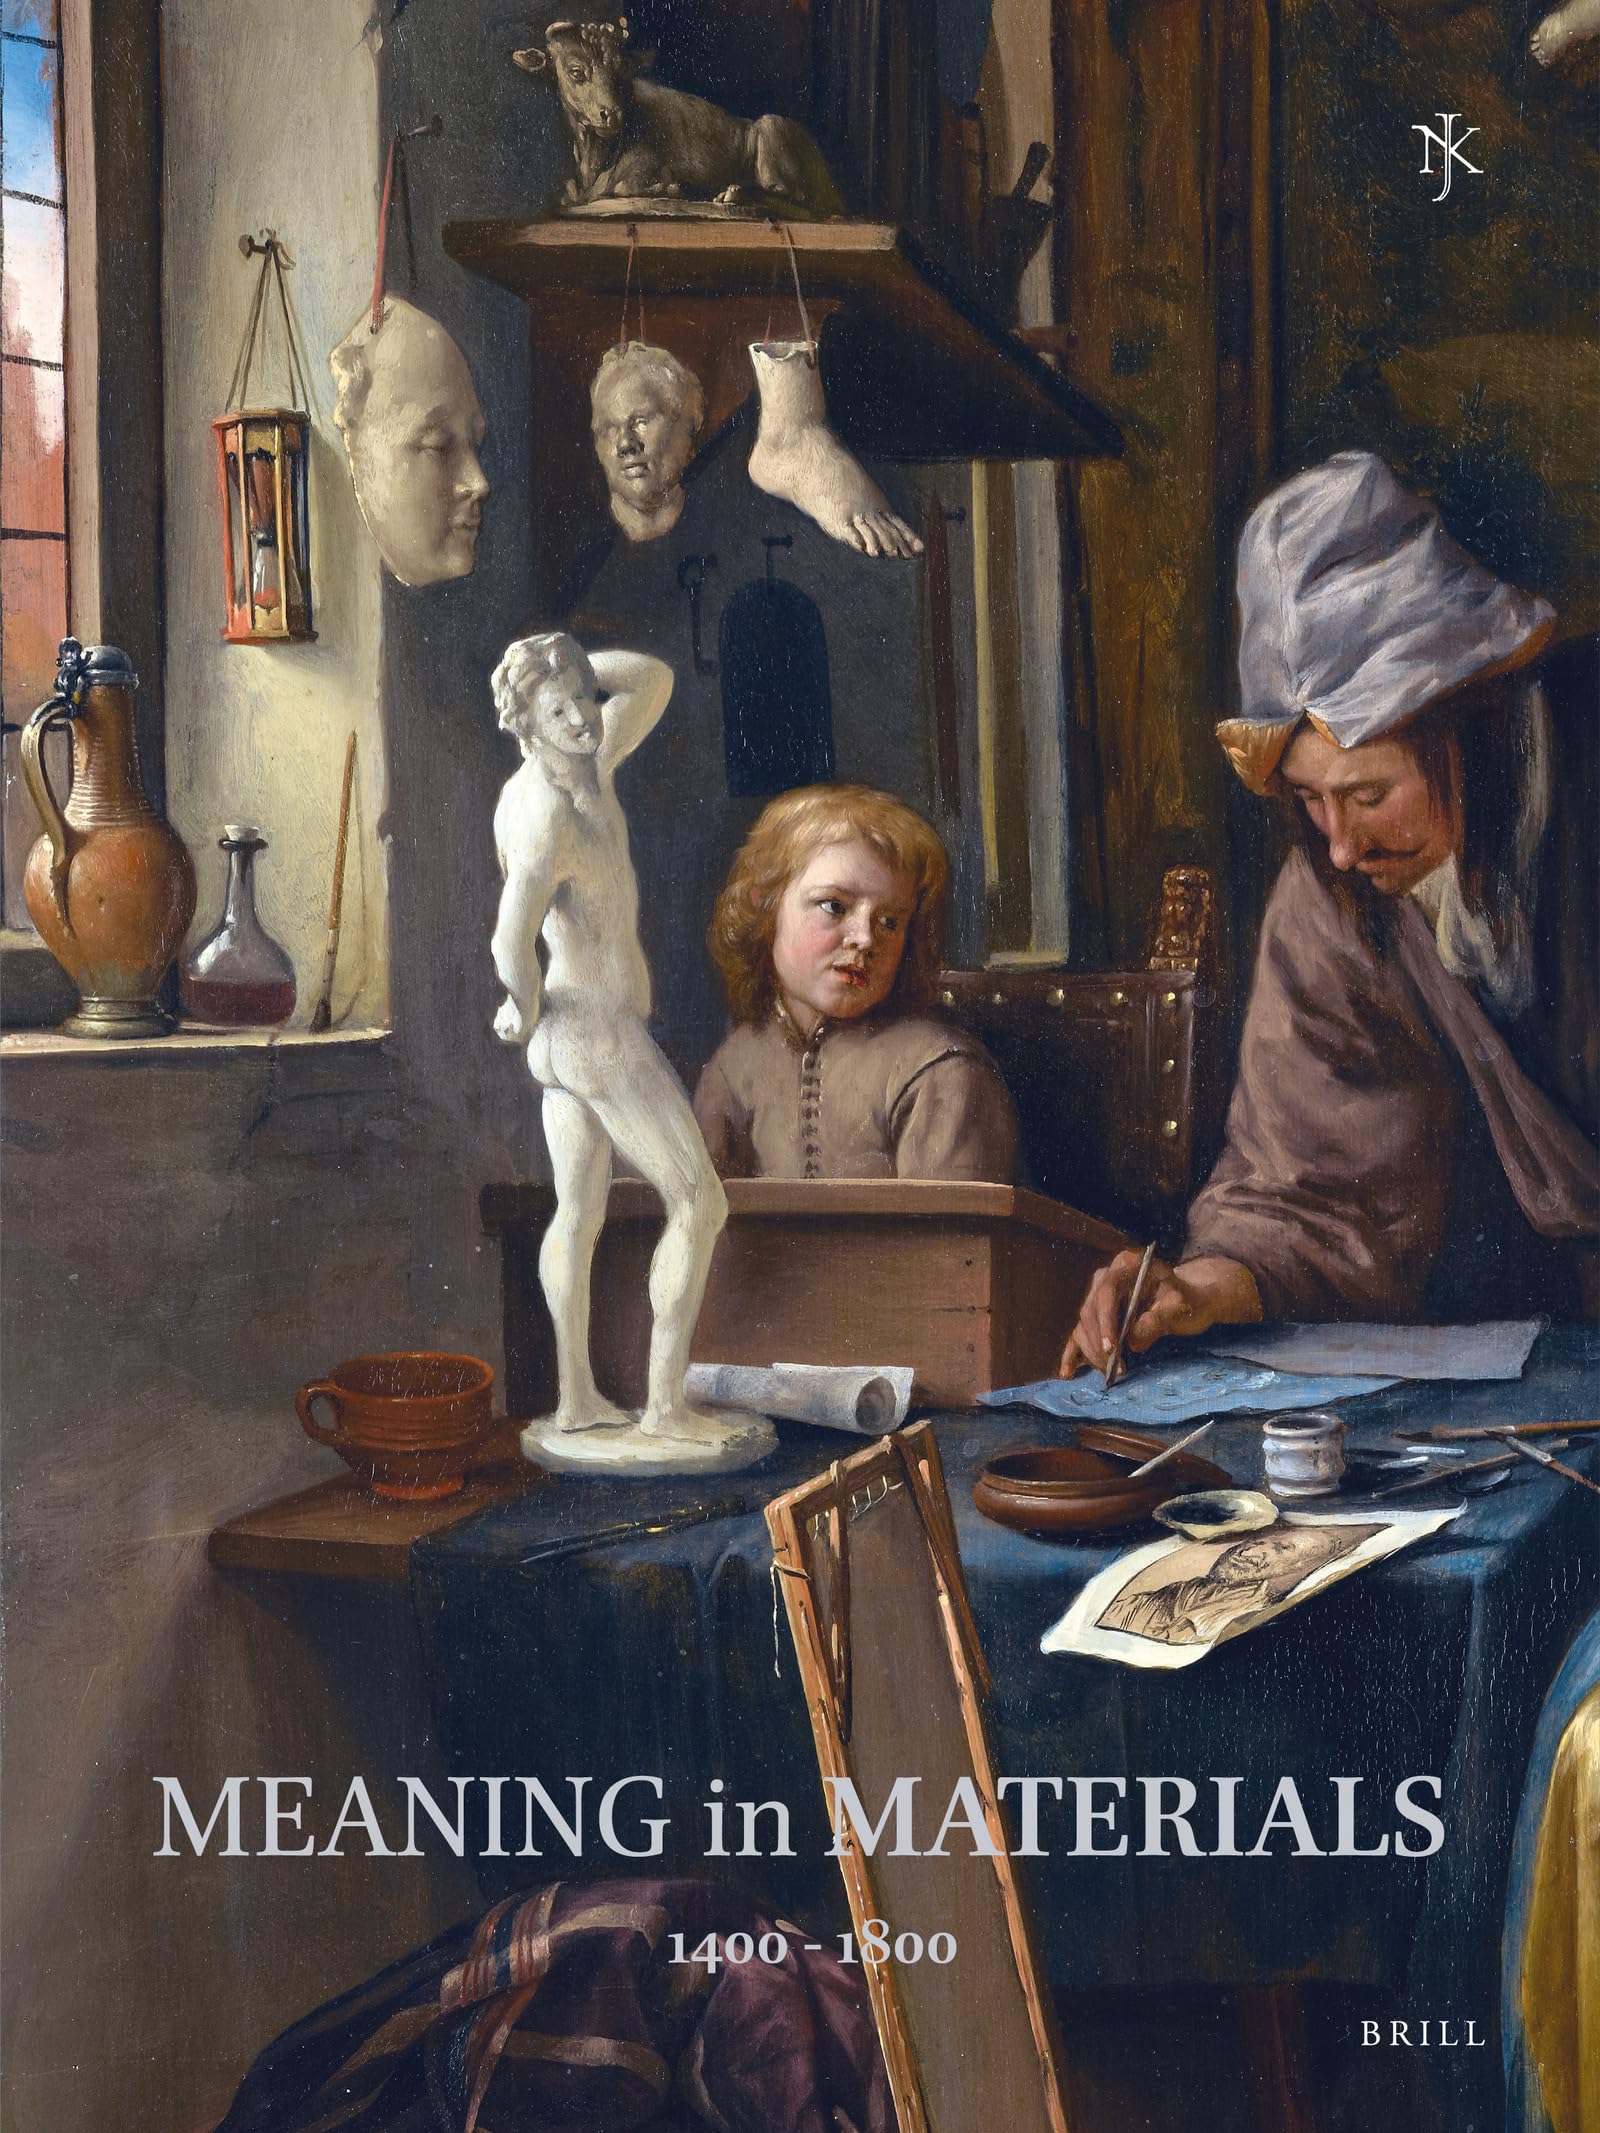 Netherlands Yearbook for History of Art 2012, The Meaning in Materials (Netherlands Yearbook for History of Art / Nederlands Kunsthi) (English and Dutch Edition)